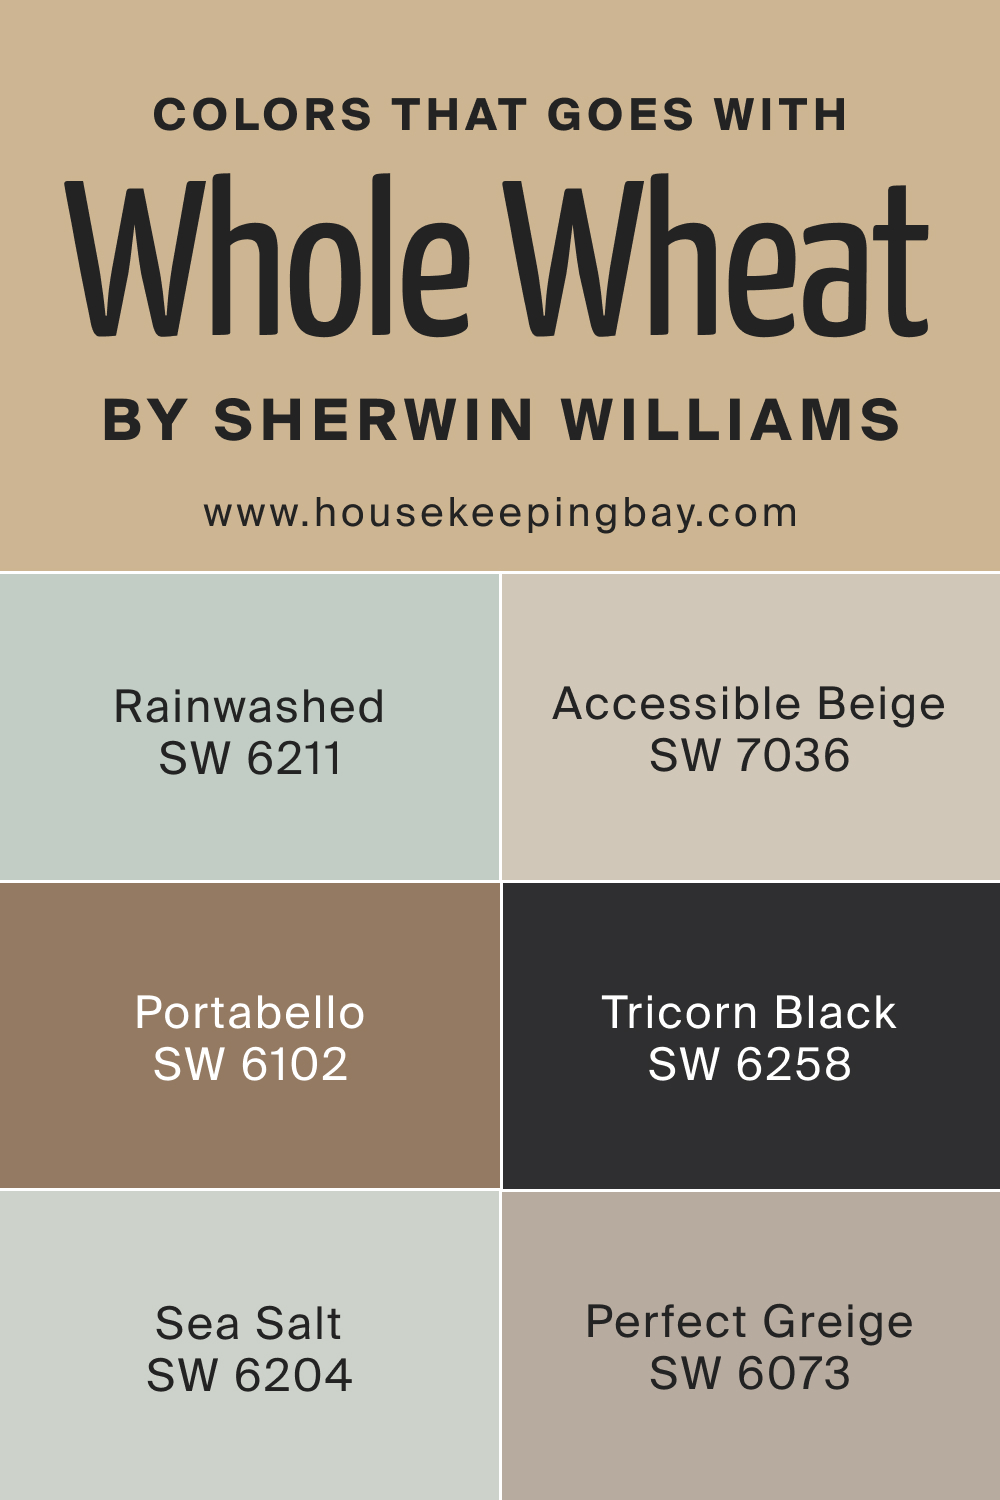 Colors that goes with SW Whole Wheat by Sherwin Williams